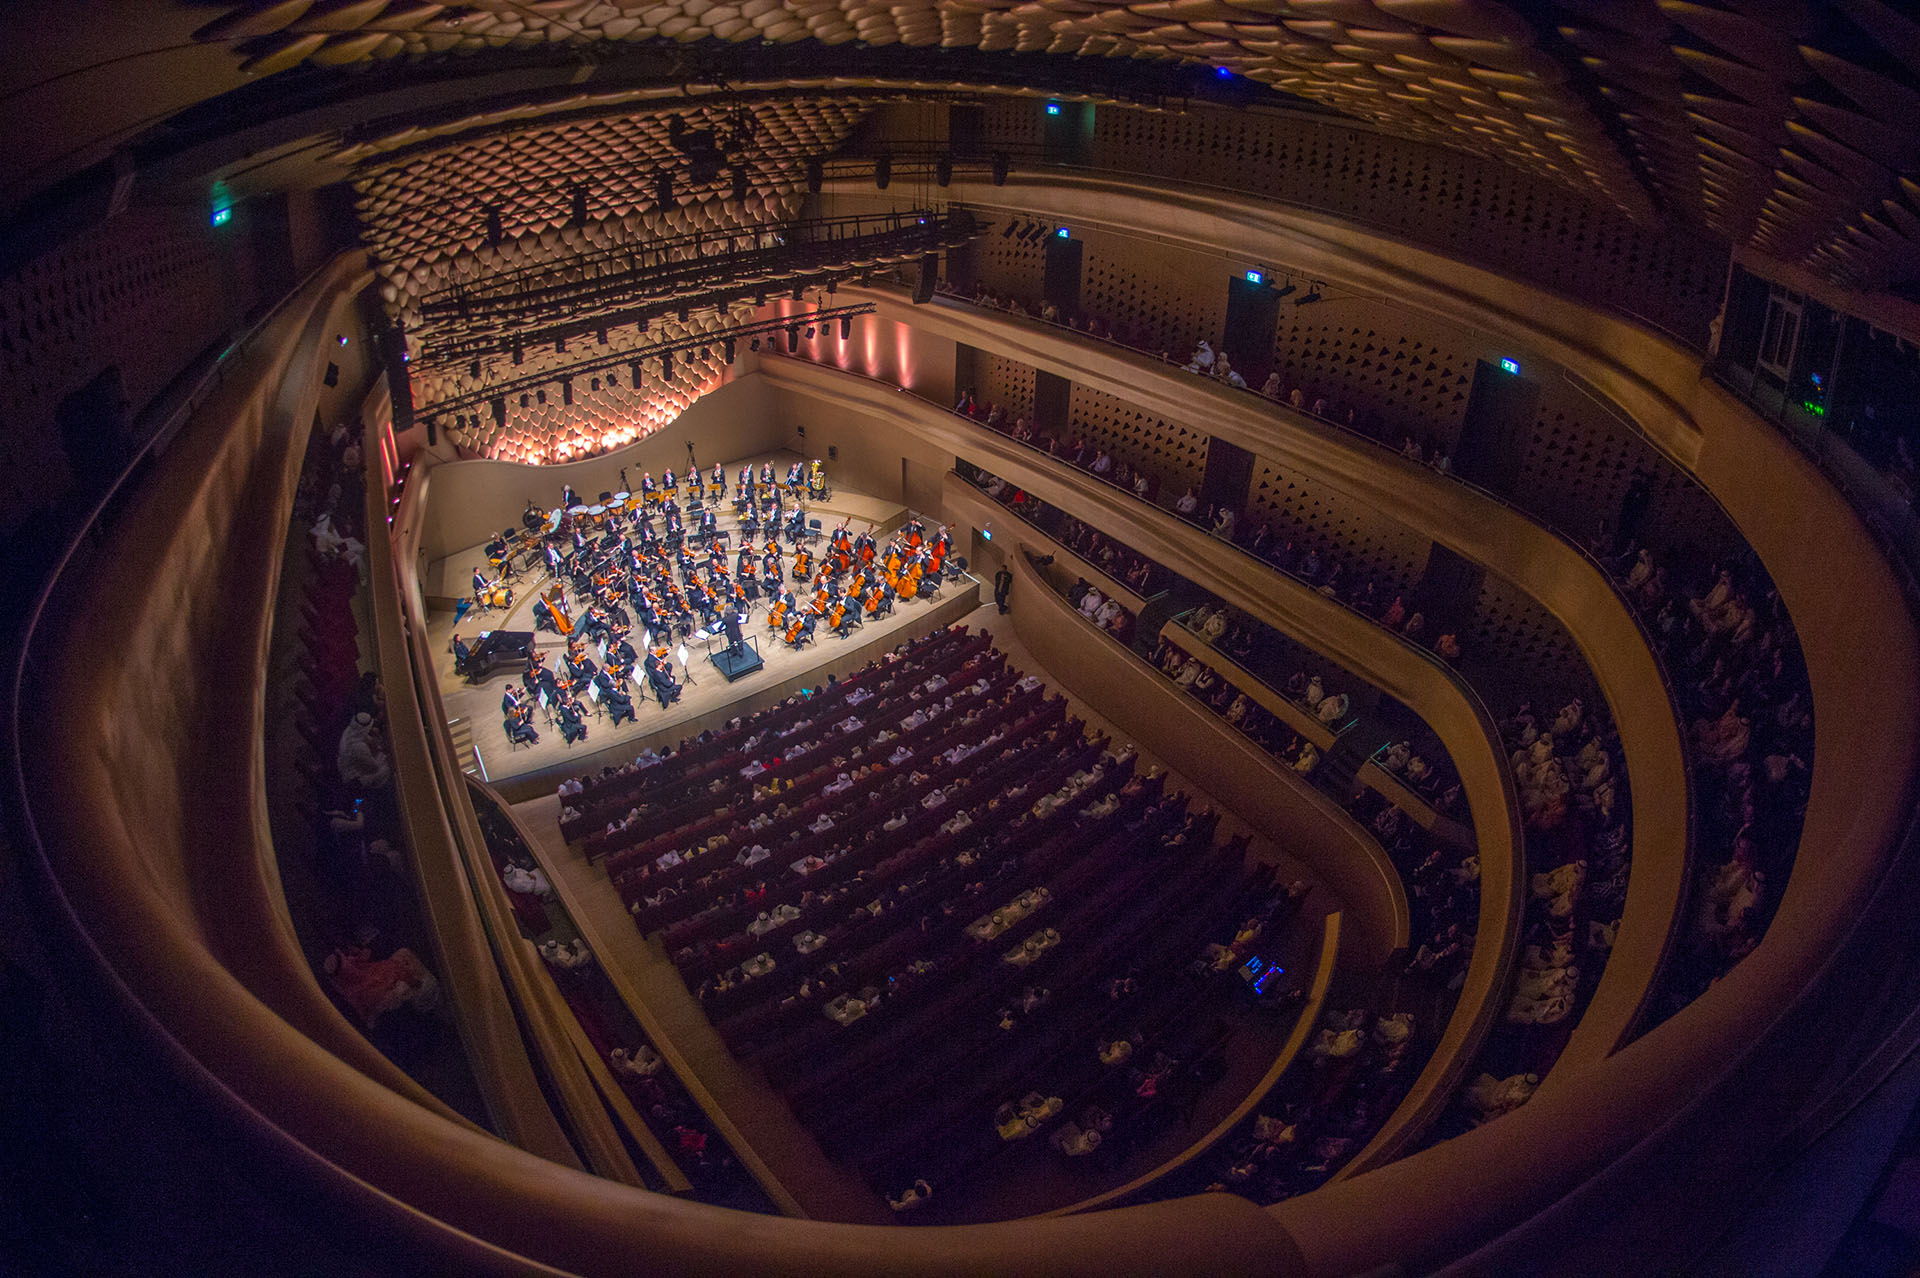 <p>The Concert Hall features state-of-the-art technology that allows it to adjust acoustic parameters to accommodate performances from full orchestras to intimate jazz ensembles.</p>